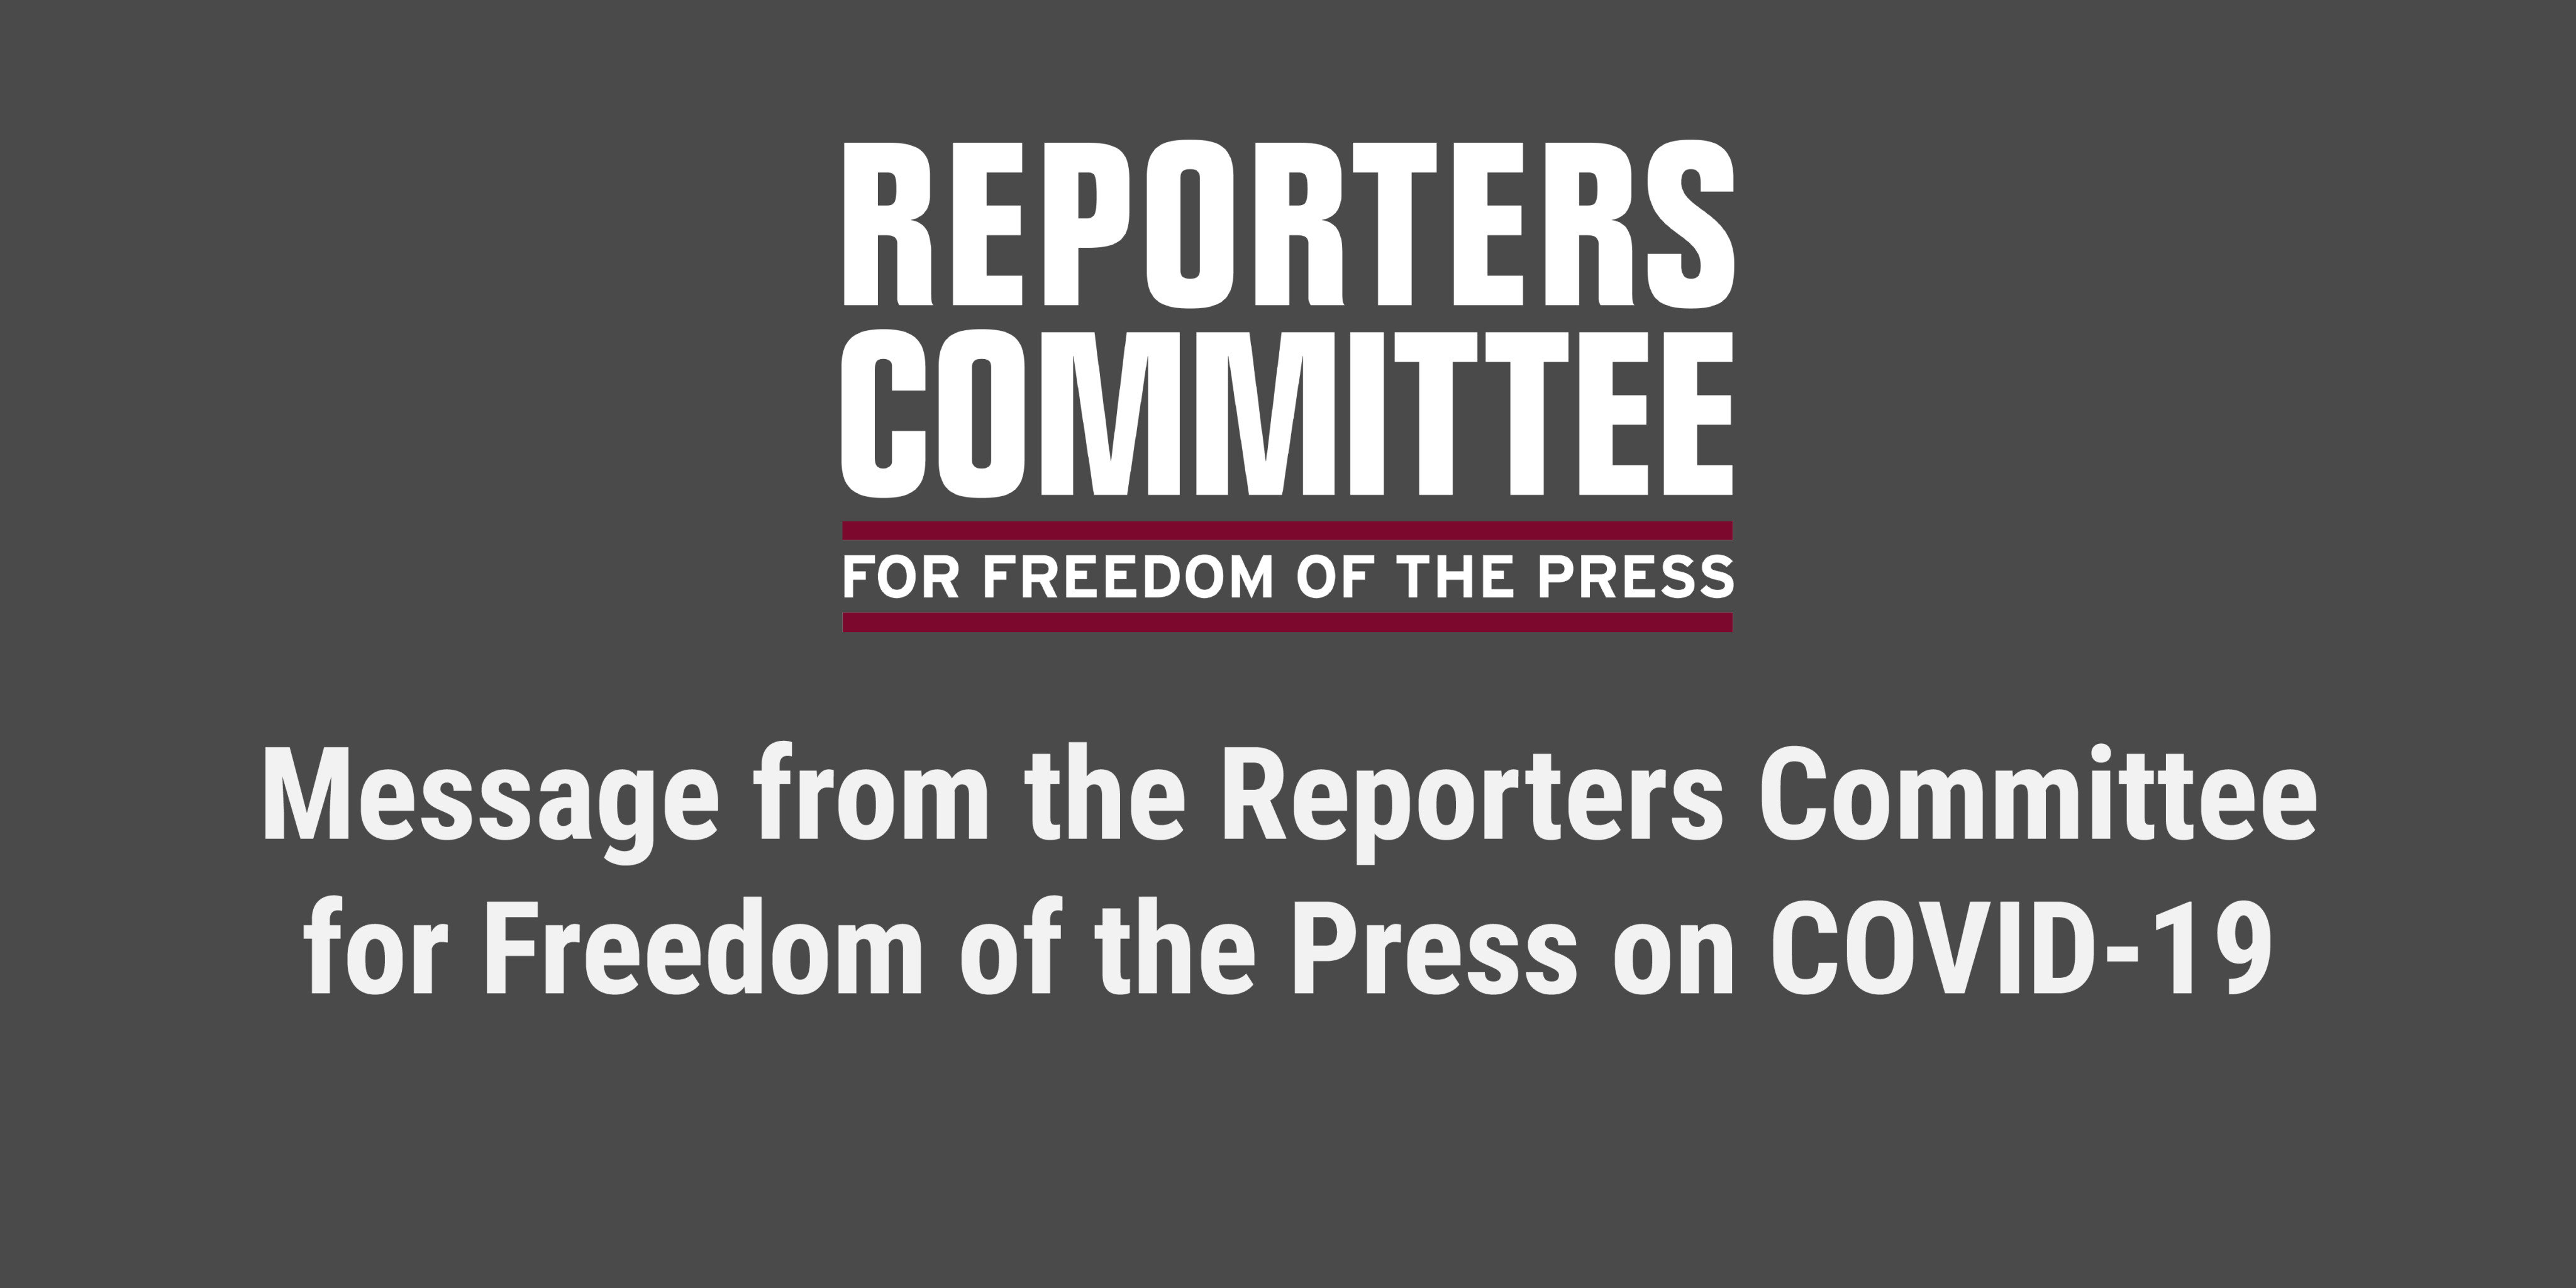 Message from Reporters Committee on COVID-19